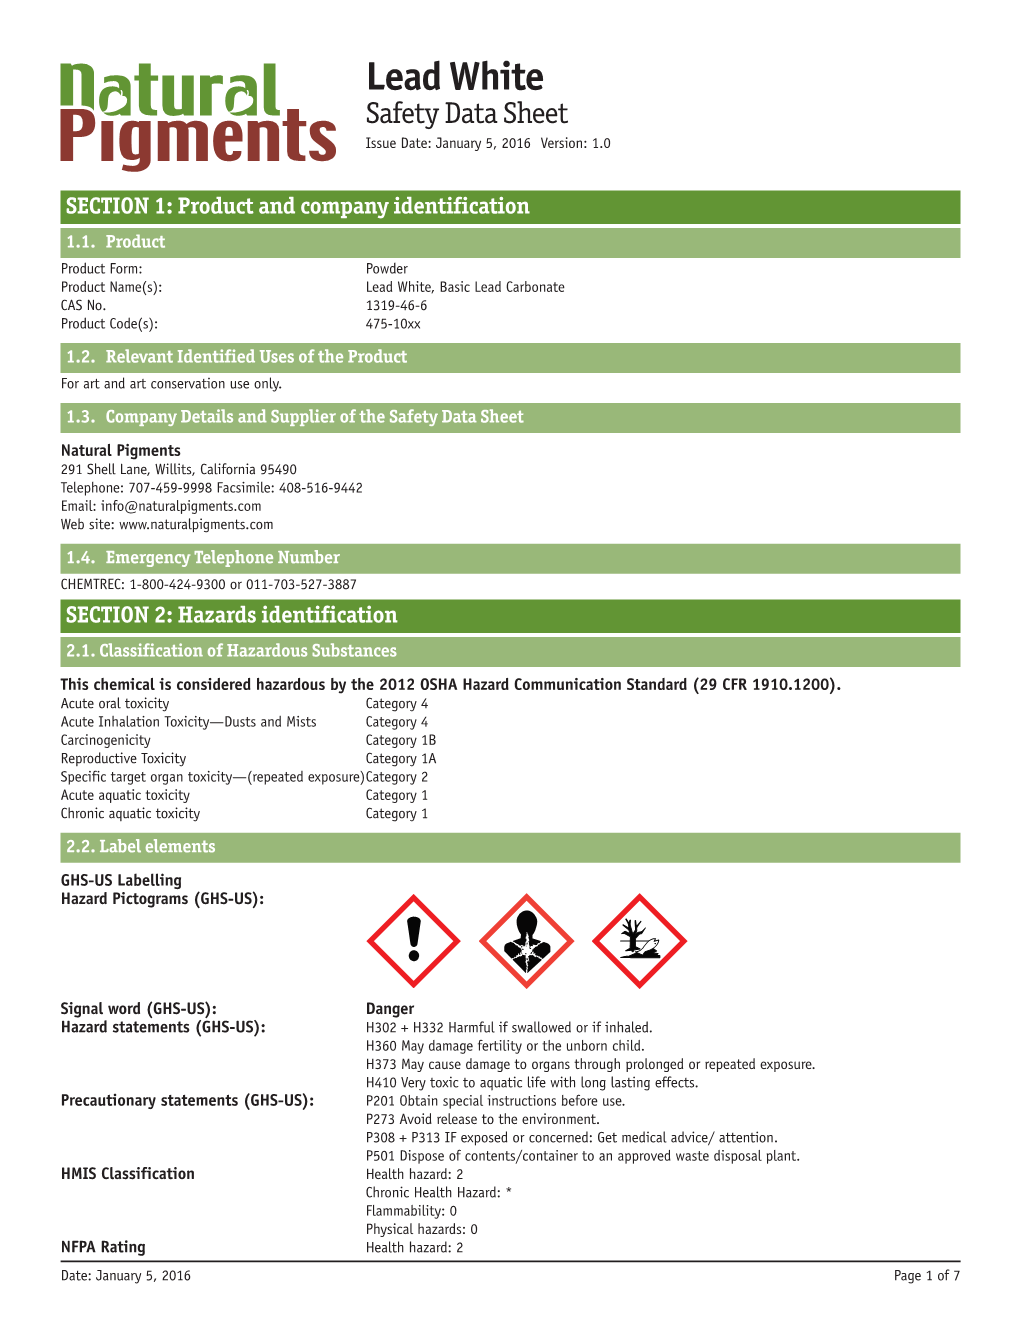 Lead White Safety Data Sheet Issue Date: January 5, 2016 Version: 1.0